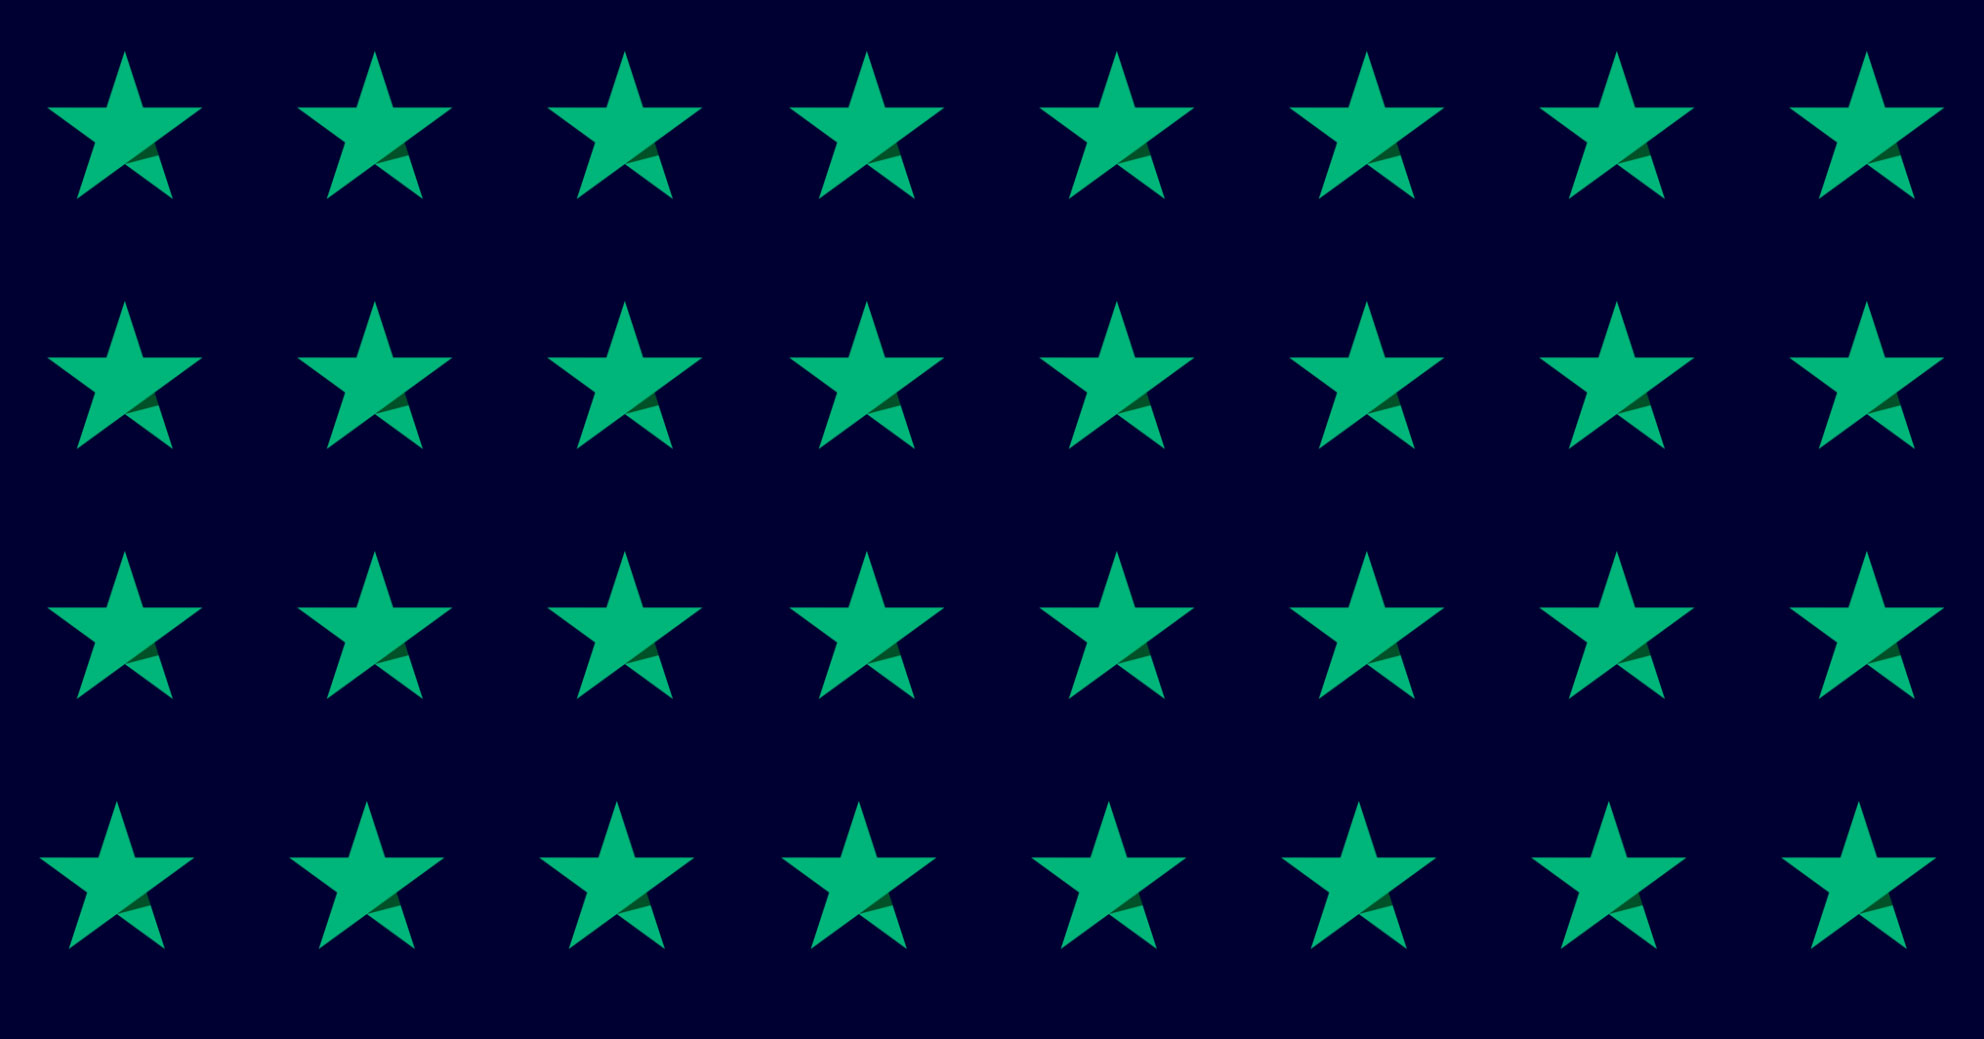 An image of Trustpilot stars on the navy blue background. Snapshot - what is Trustpilot